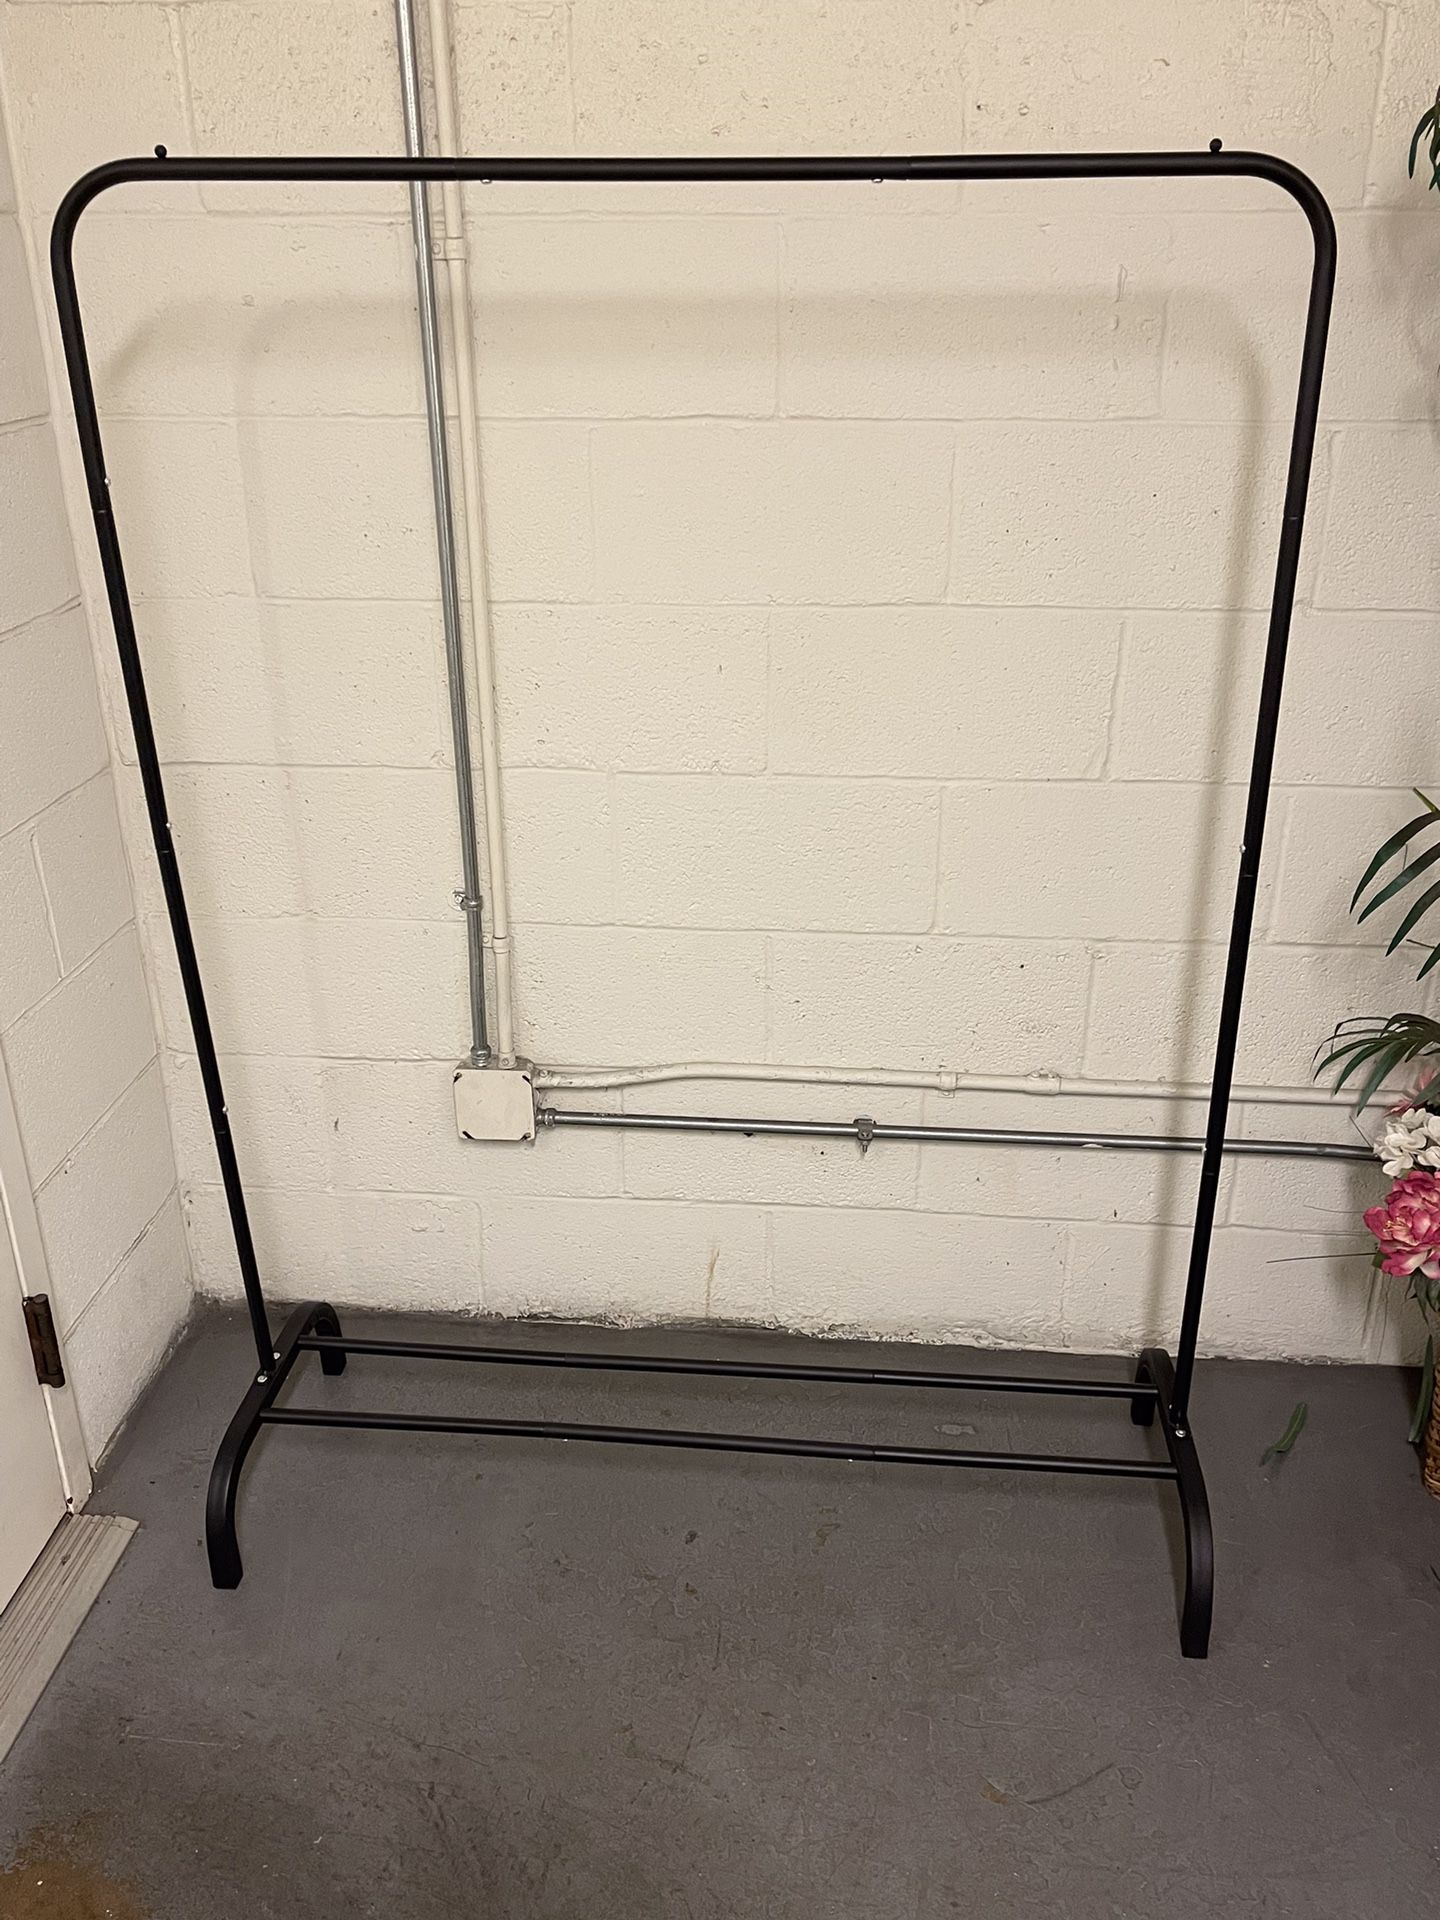 Single Rod, Adjustable, Large All-Metal BLACK Garment Rack - firm price - UNASSEMBLED;  assembled price is higher and also is firm